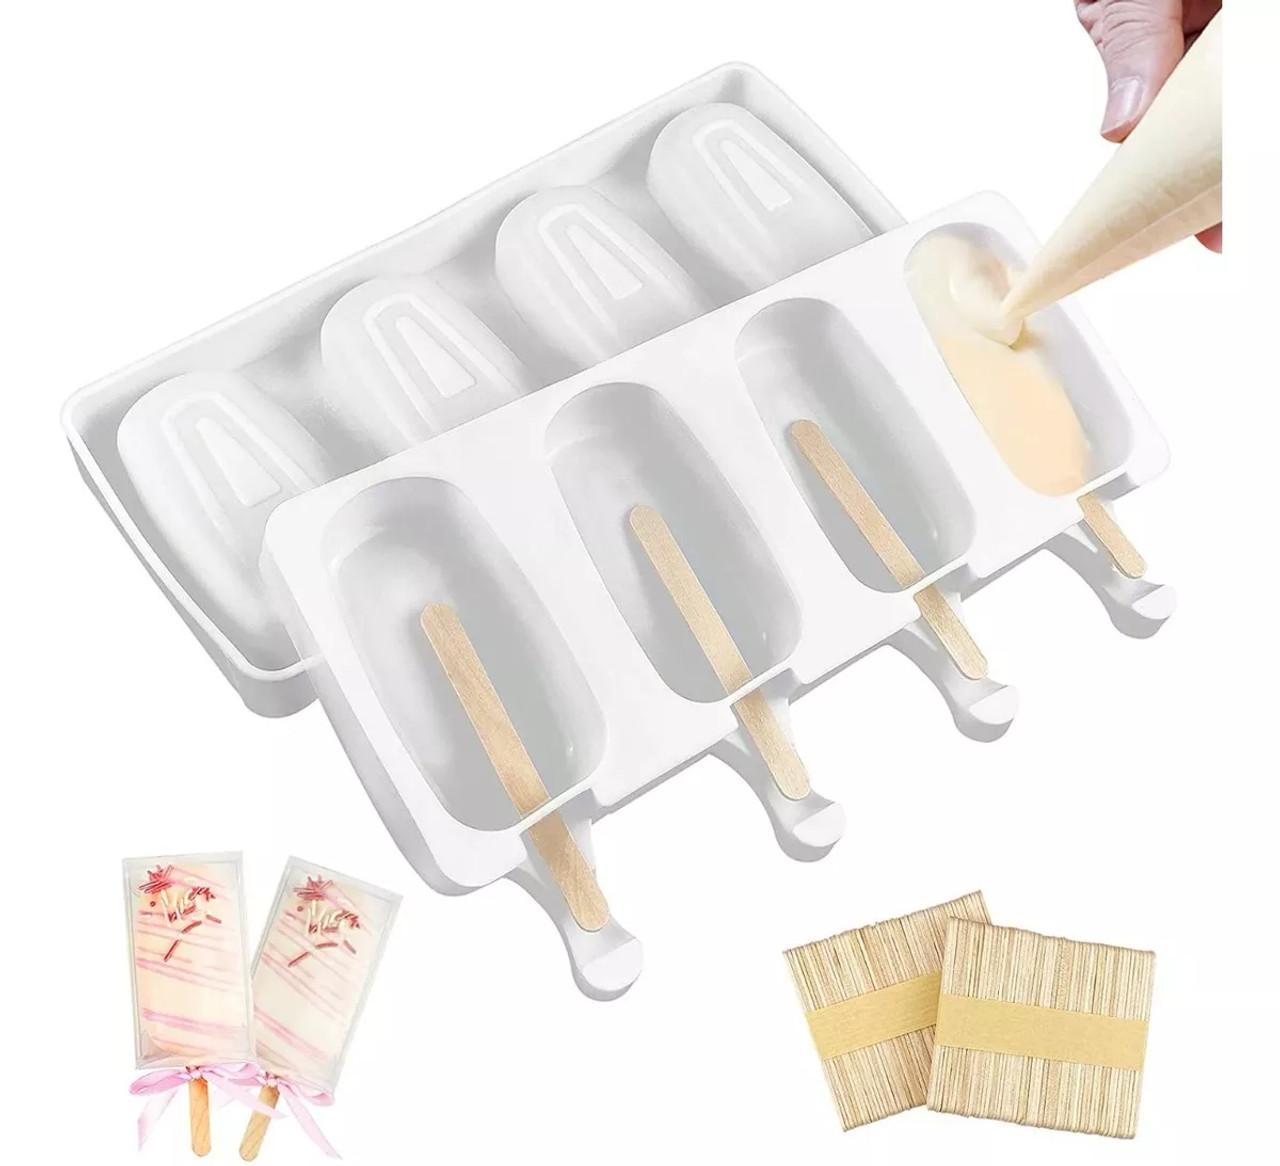 https://cdn11.bigcommerce.com/s-3stx4pub31/images/stencil/1280x1280/products/8267/23623/pack-of-silicone-ice-cream-mold-50-large-sticks-for-freezer__07029.1677155524.jpg?c=2